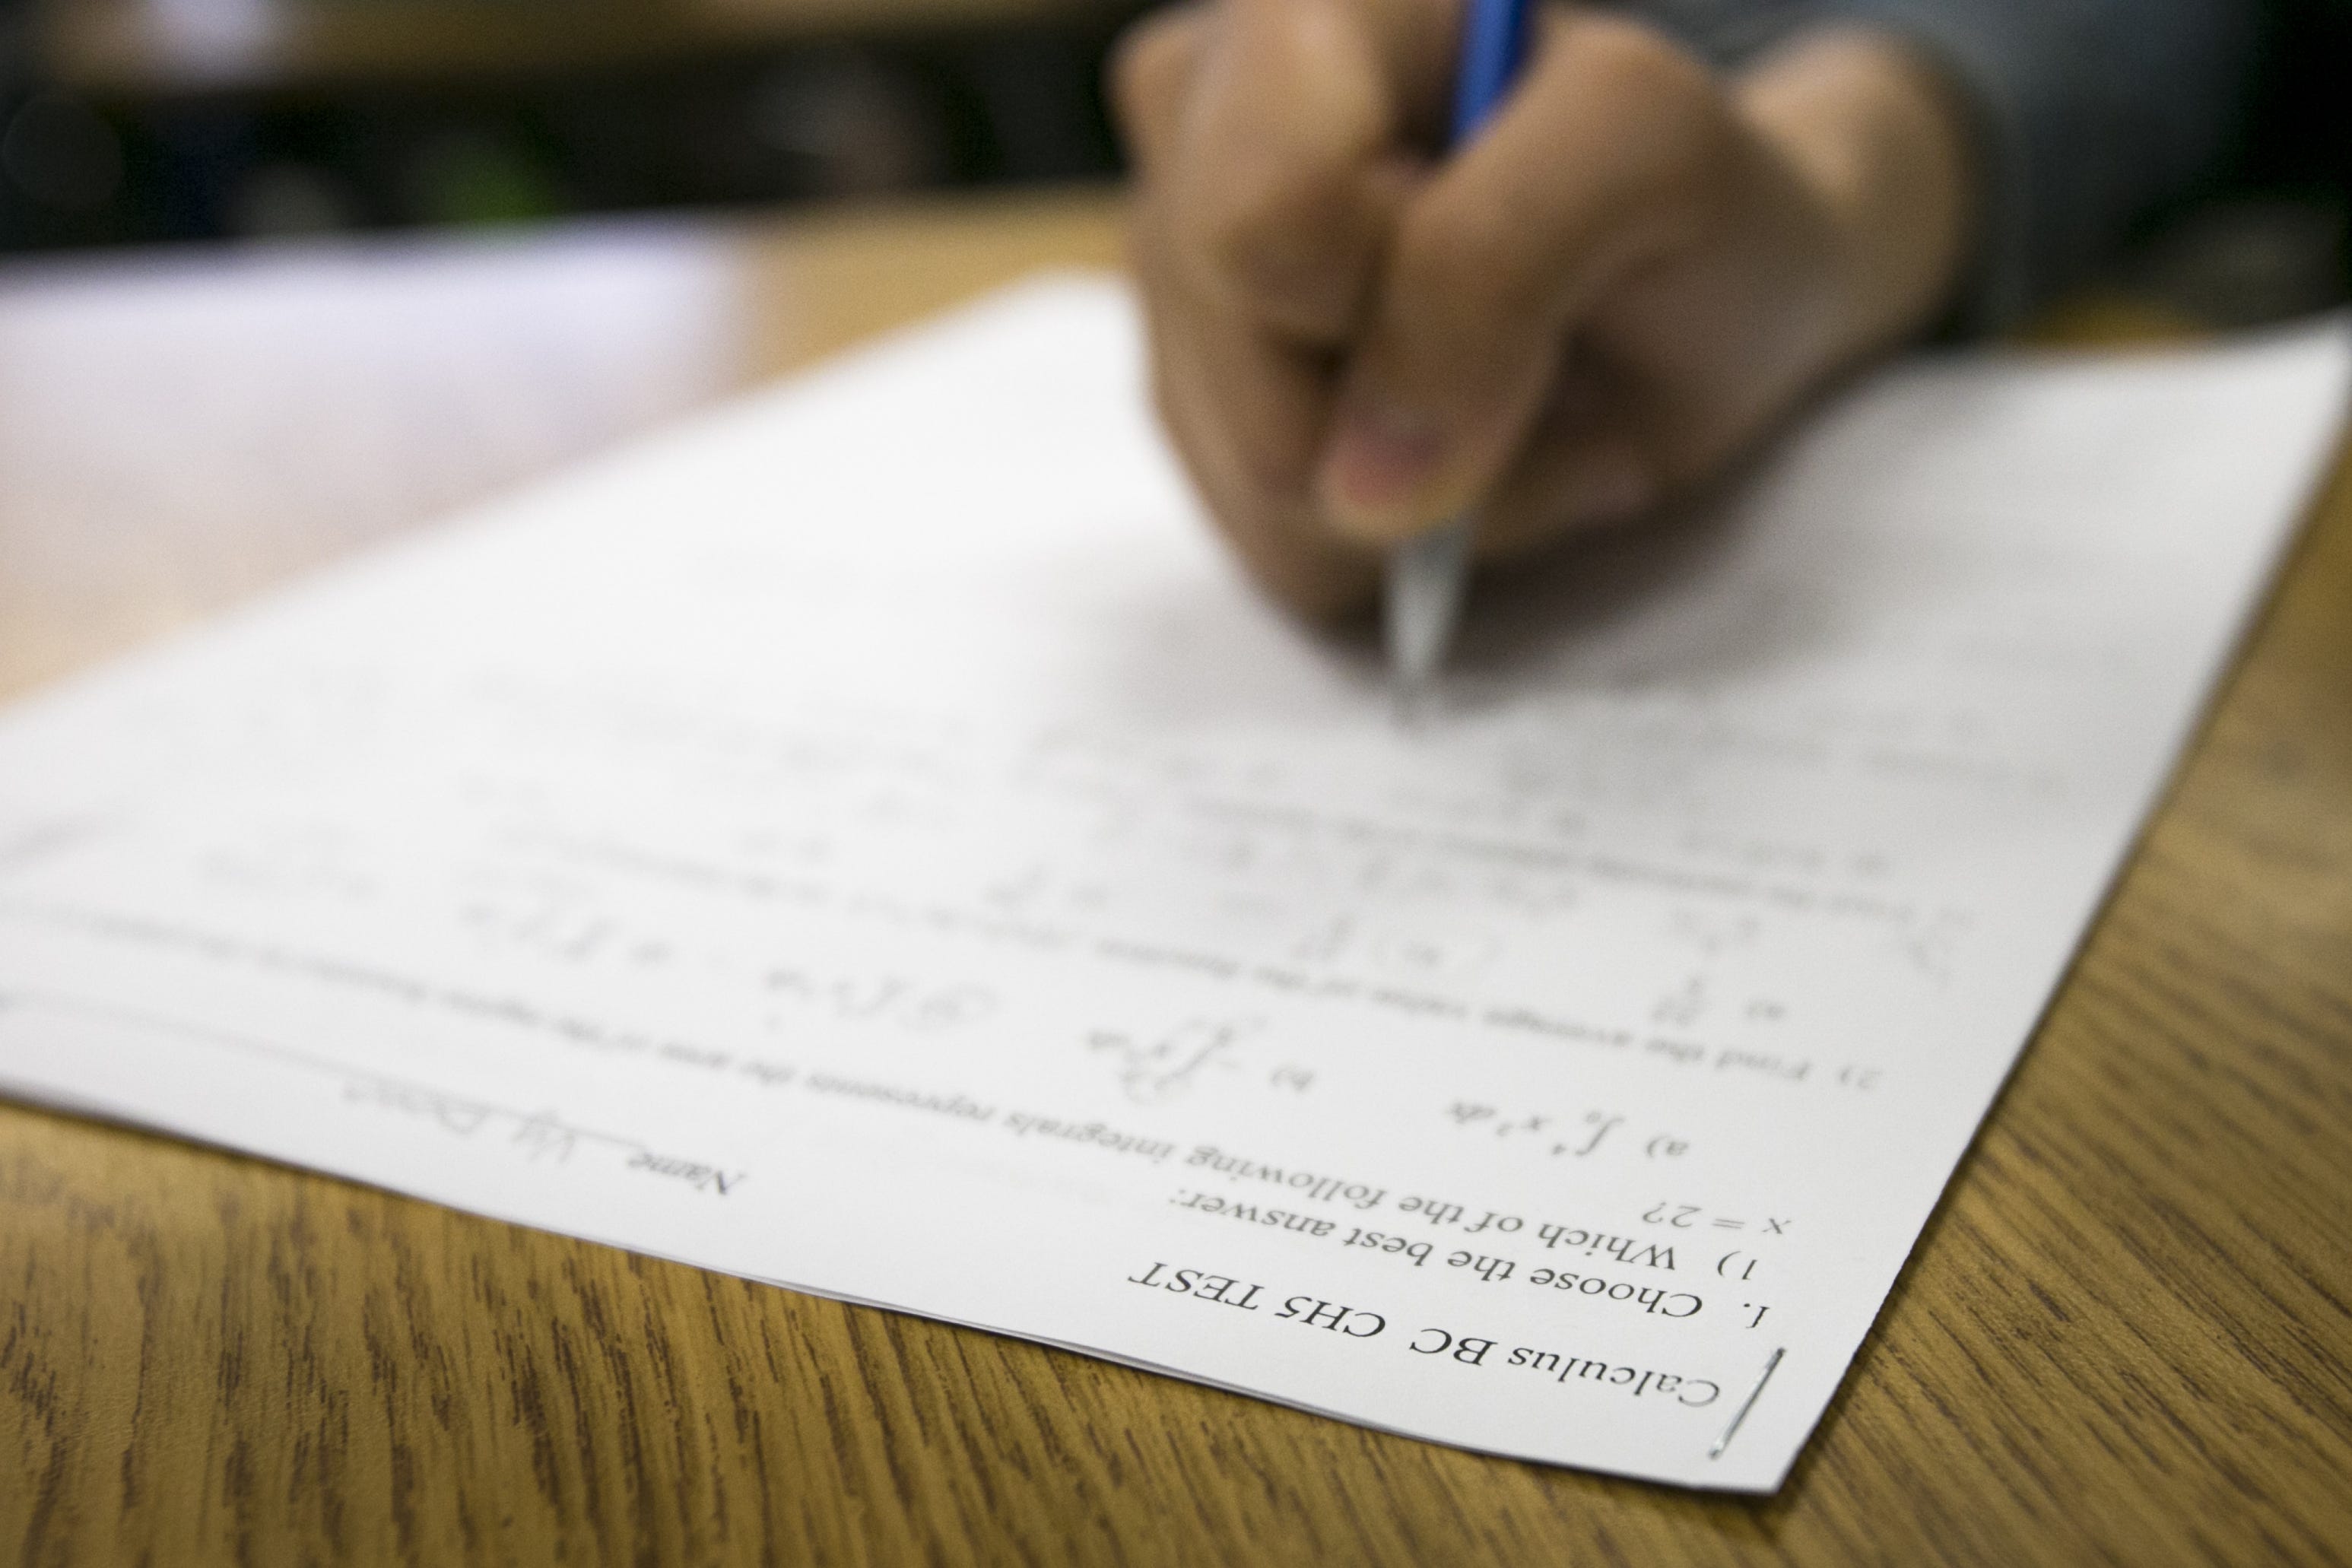 Up to 90 percent of new Arizona school letter grades could depend on AzMERIT scores